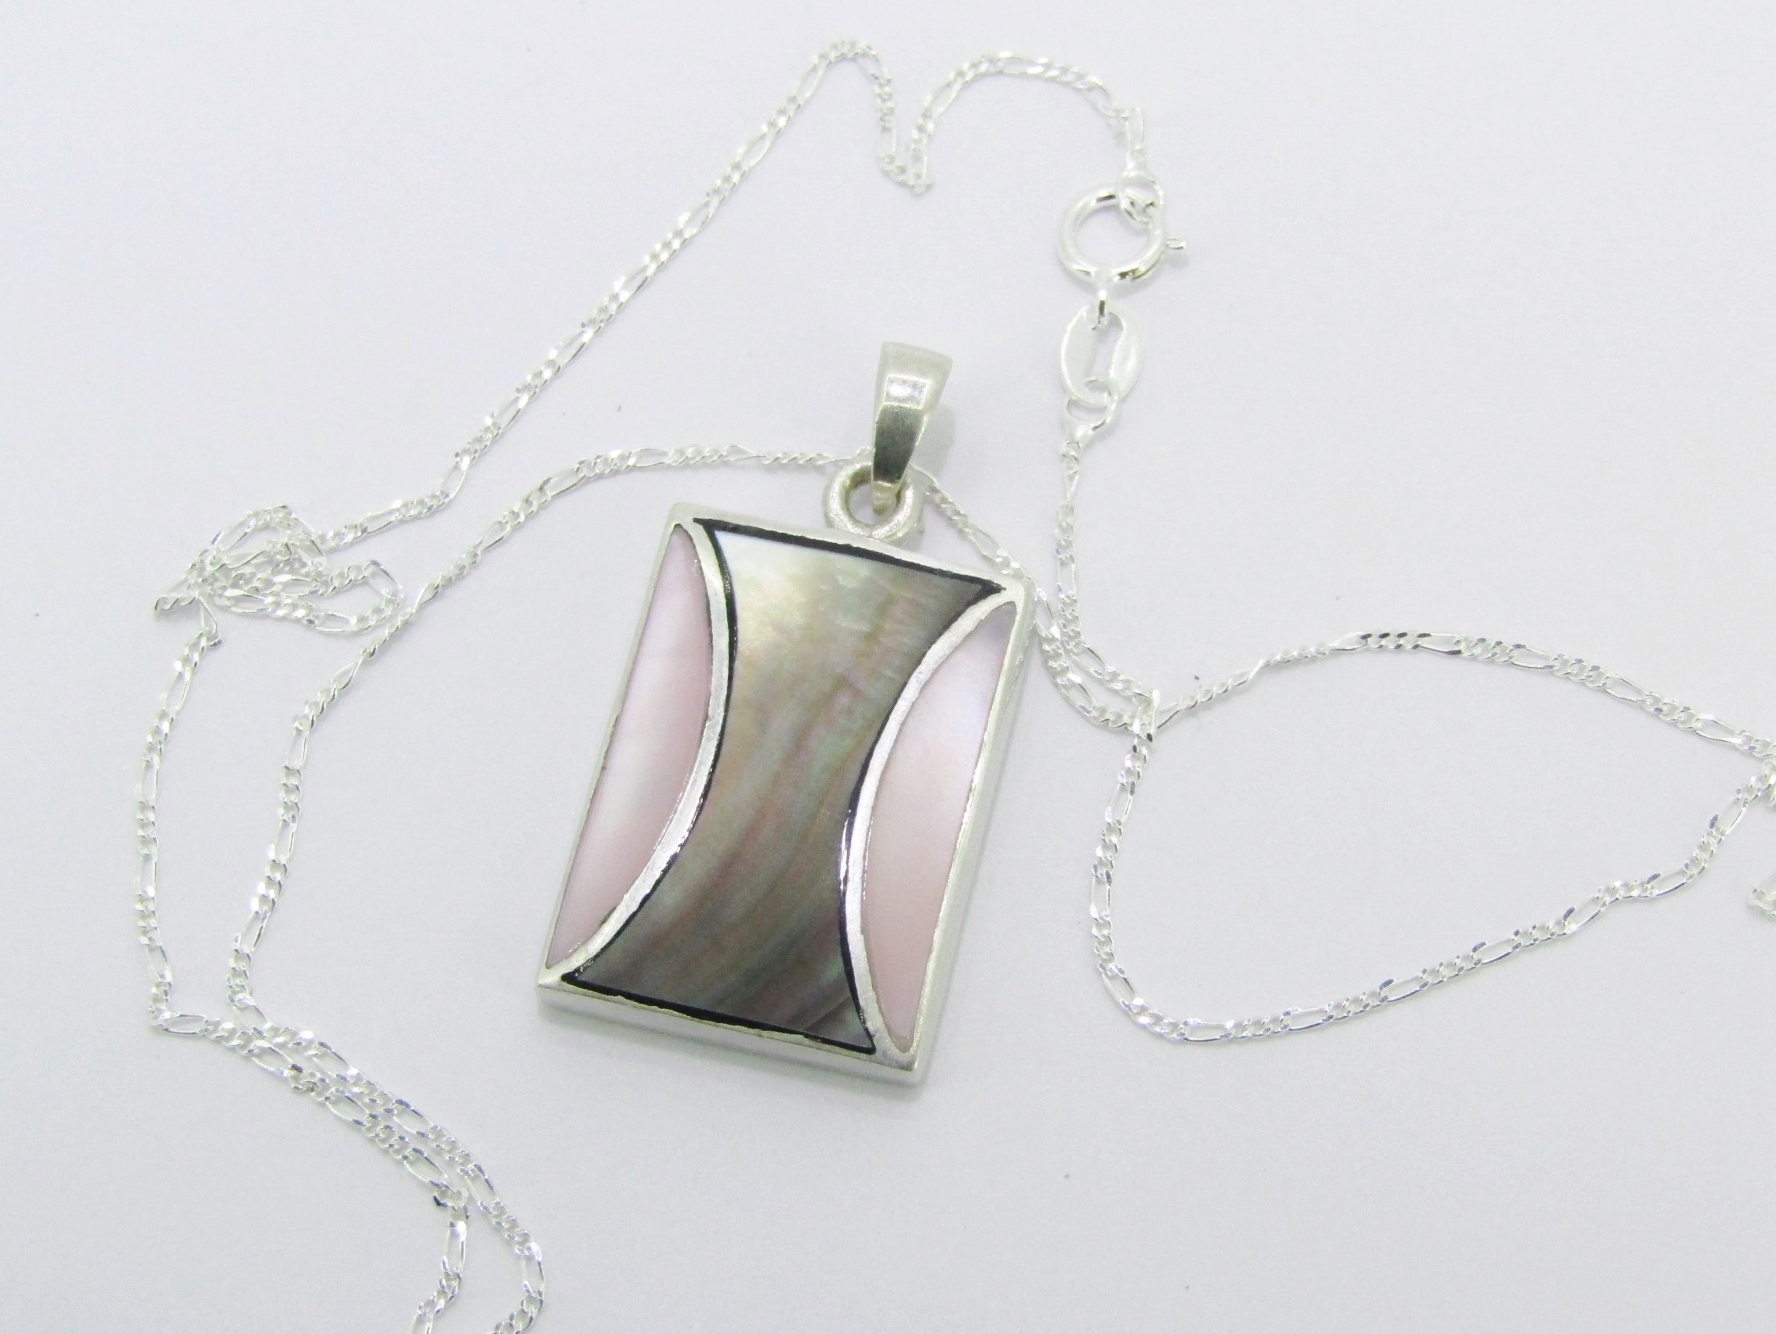 A Lovely Mother of Pearl Pendant on Chain in Sterling Silver.